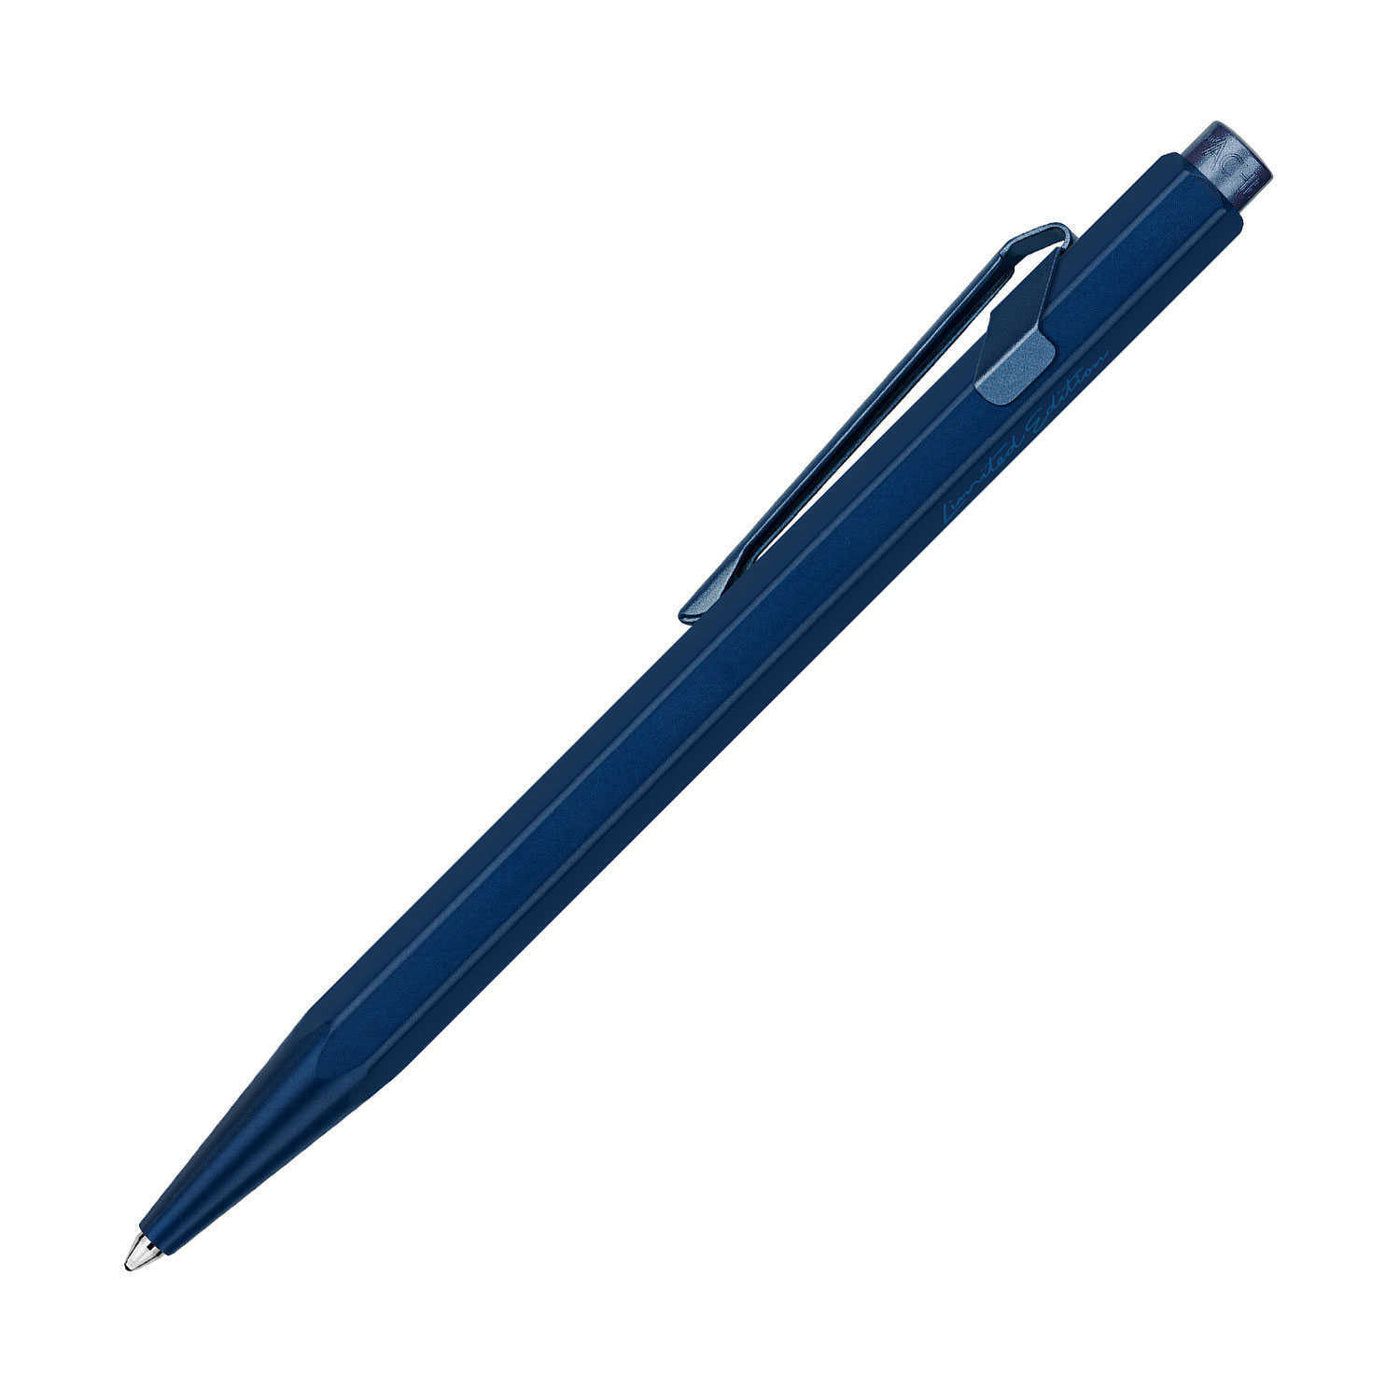 Caran d'Ache 849 Claim Your Style Ball Pen - Midnight Blue (Limited Edition) 3